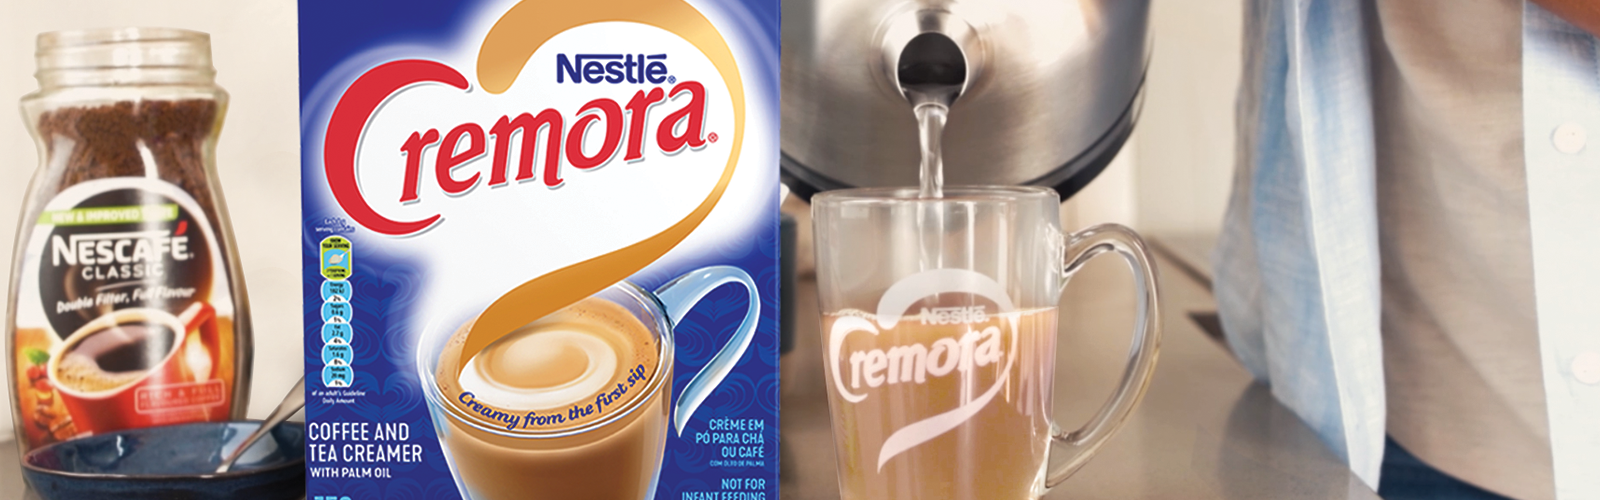 Nestle Cremora - Optimize your Mornings - Find a Perfect Morning Routine